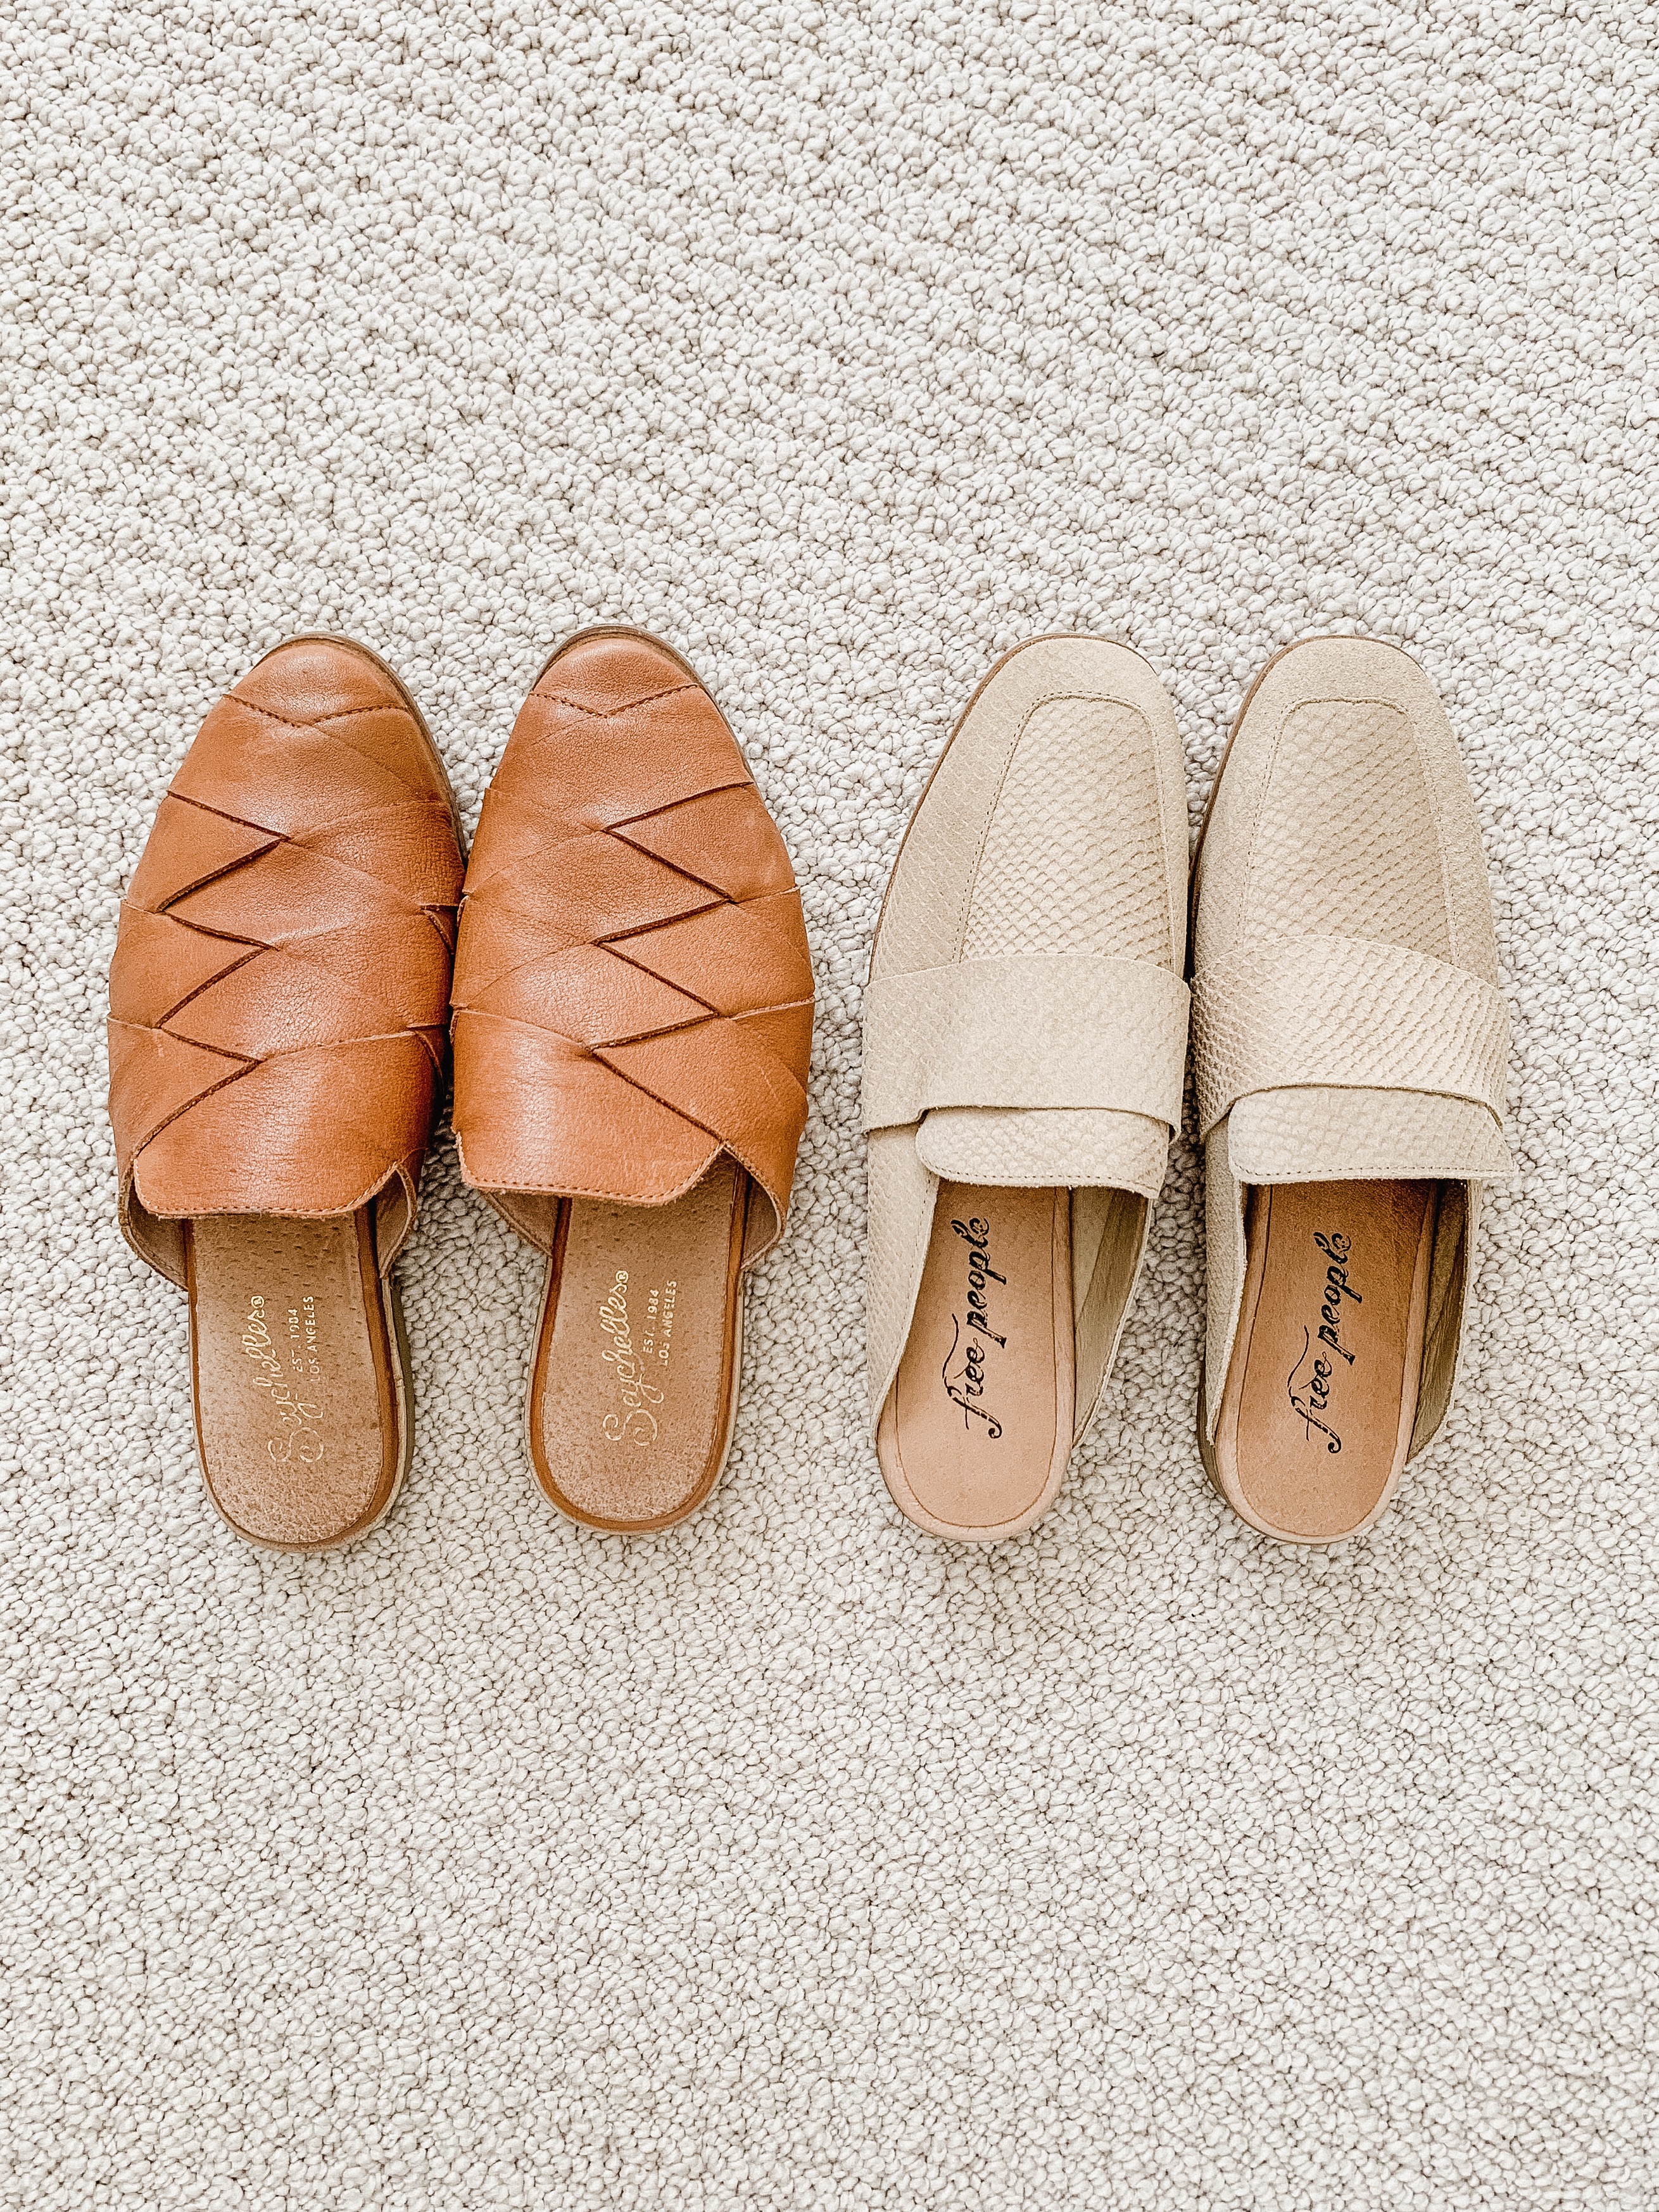 Connecticut life and style blogger Lauren McBride shares her Spring Shoes Capsule Wardrobe featuring 6 different shoe style options that are versatile for the season.